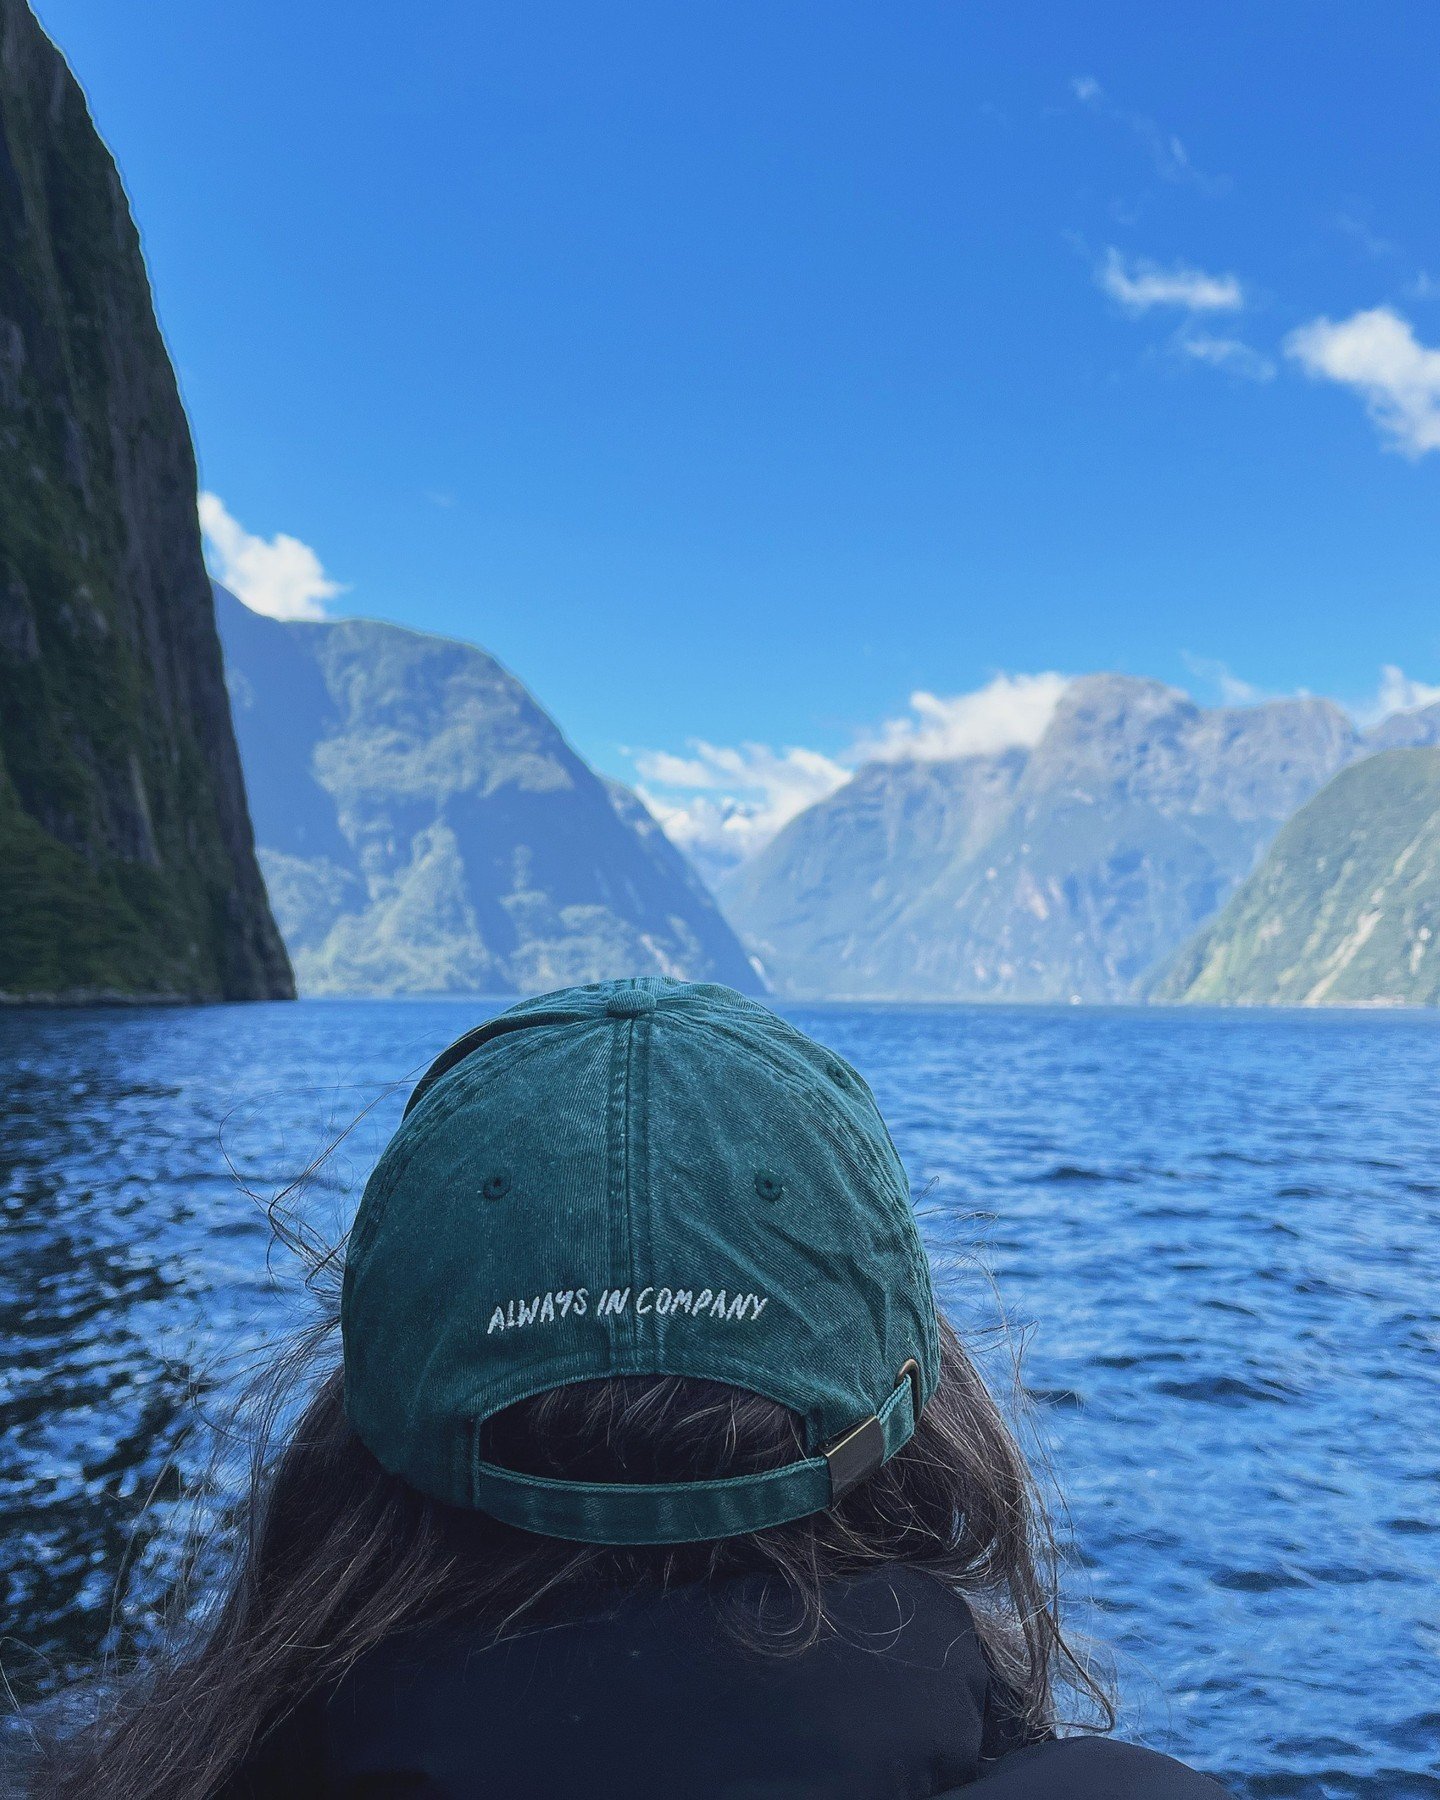 We are excited to start sharing some of the brilliant submissions to our Always In Company project over the coming weeks. This submission shows being in company in beautiful nature, with one of our &amp;Co Caps, as a constant reminder that we always 